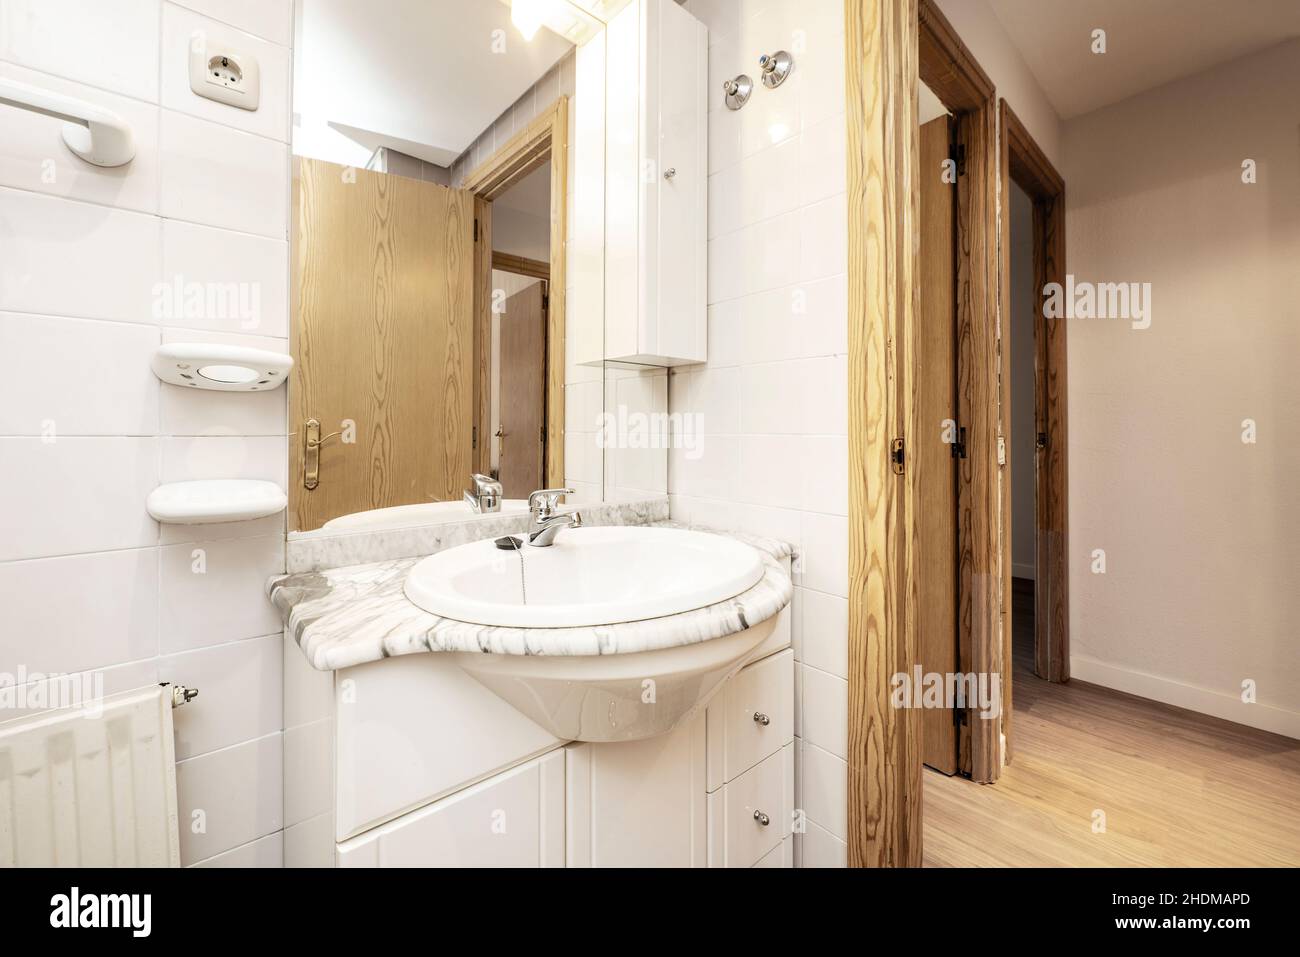 Toilet with white marble countertop and sink Stock Photo